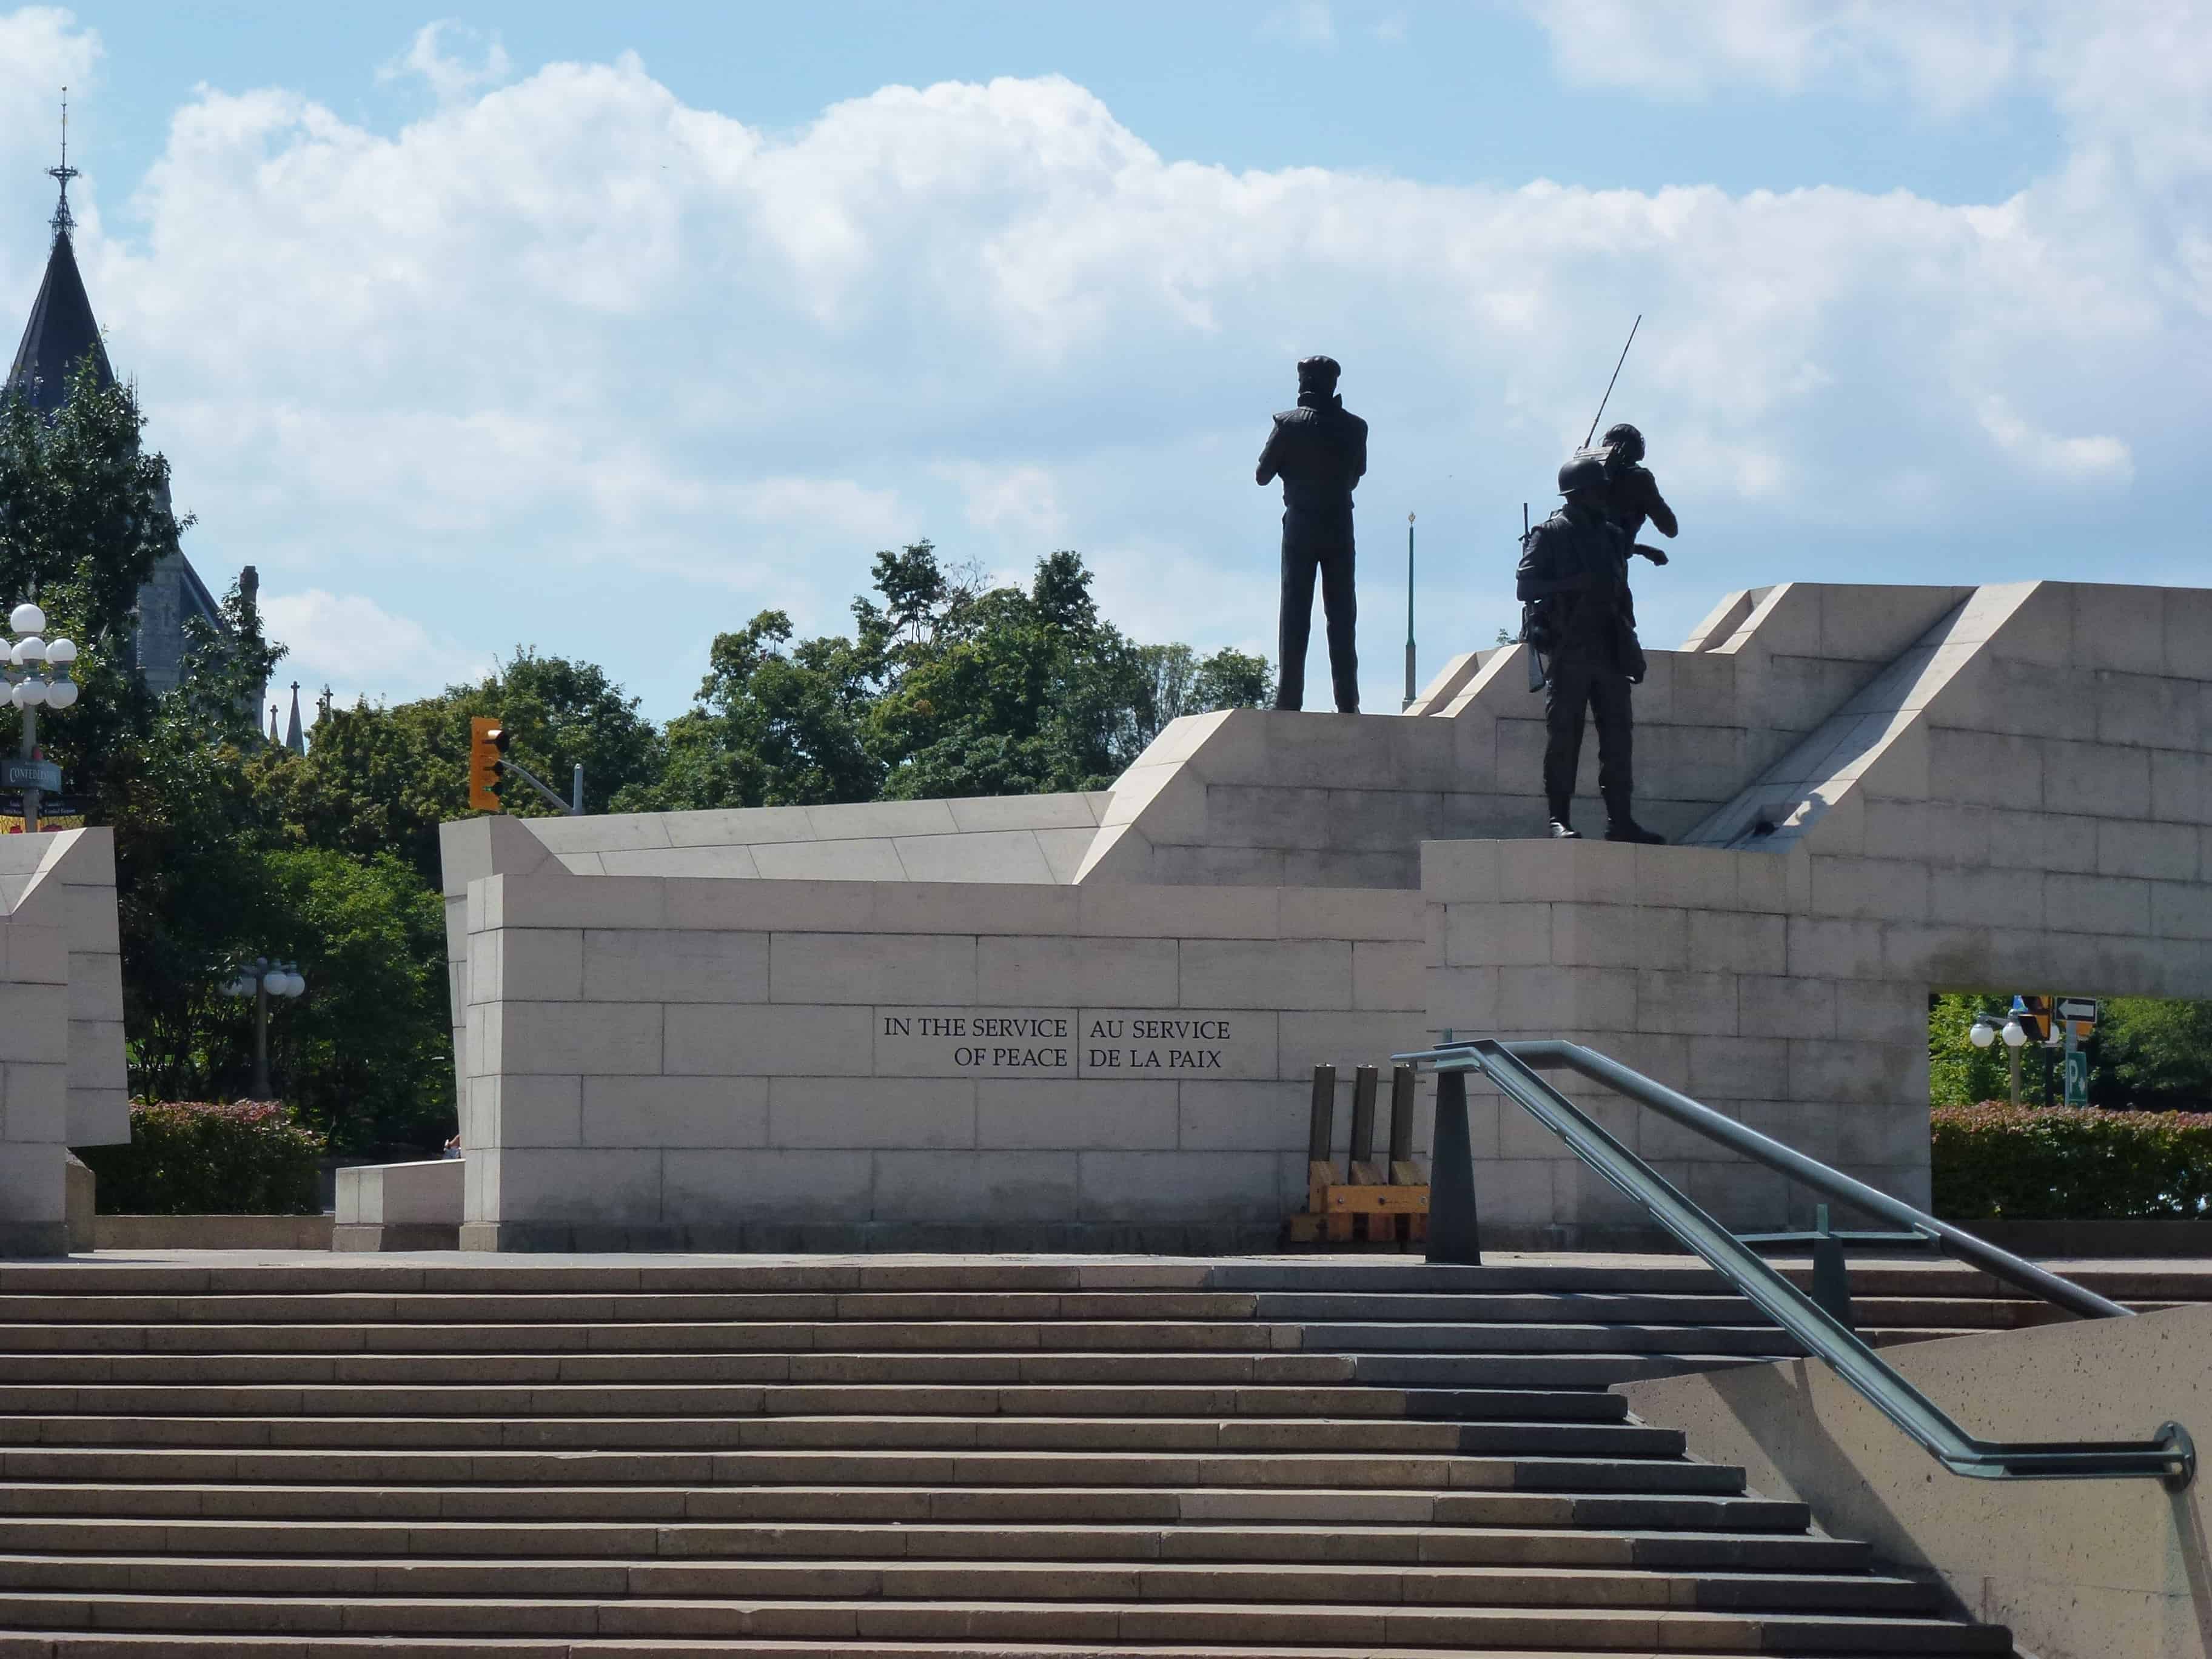 Reconciliation: The Peacekeeping Monument in Ottawa, Ontario, Canada